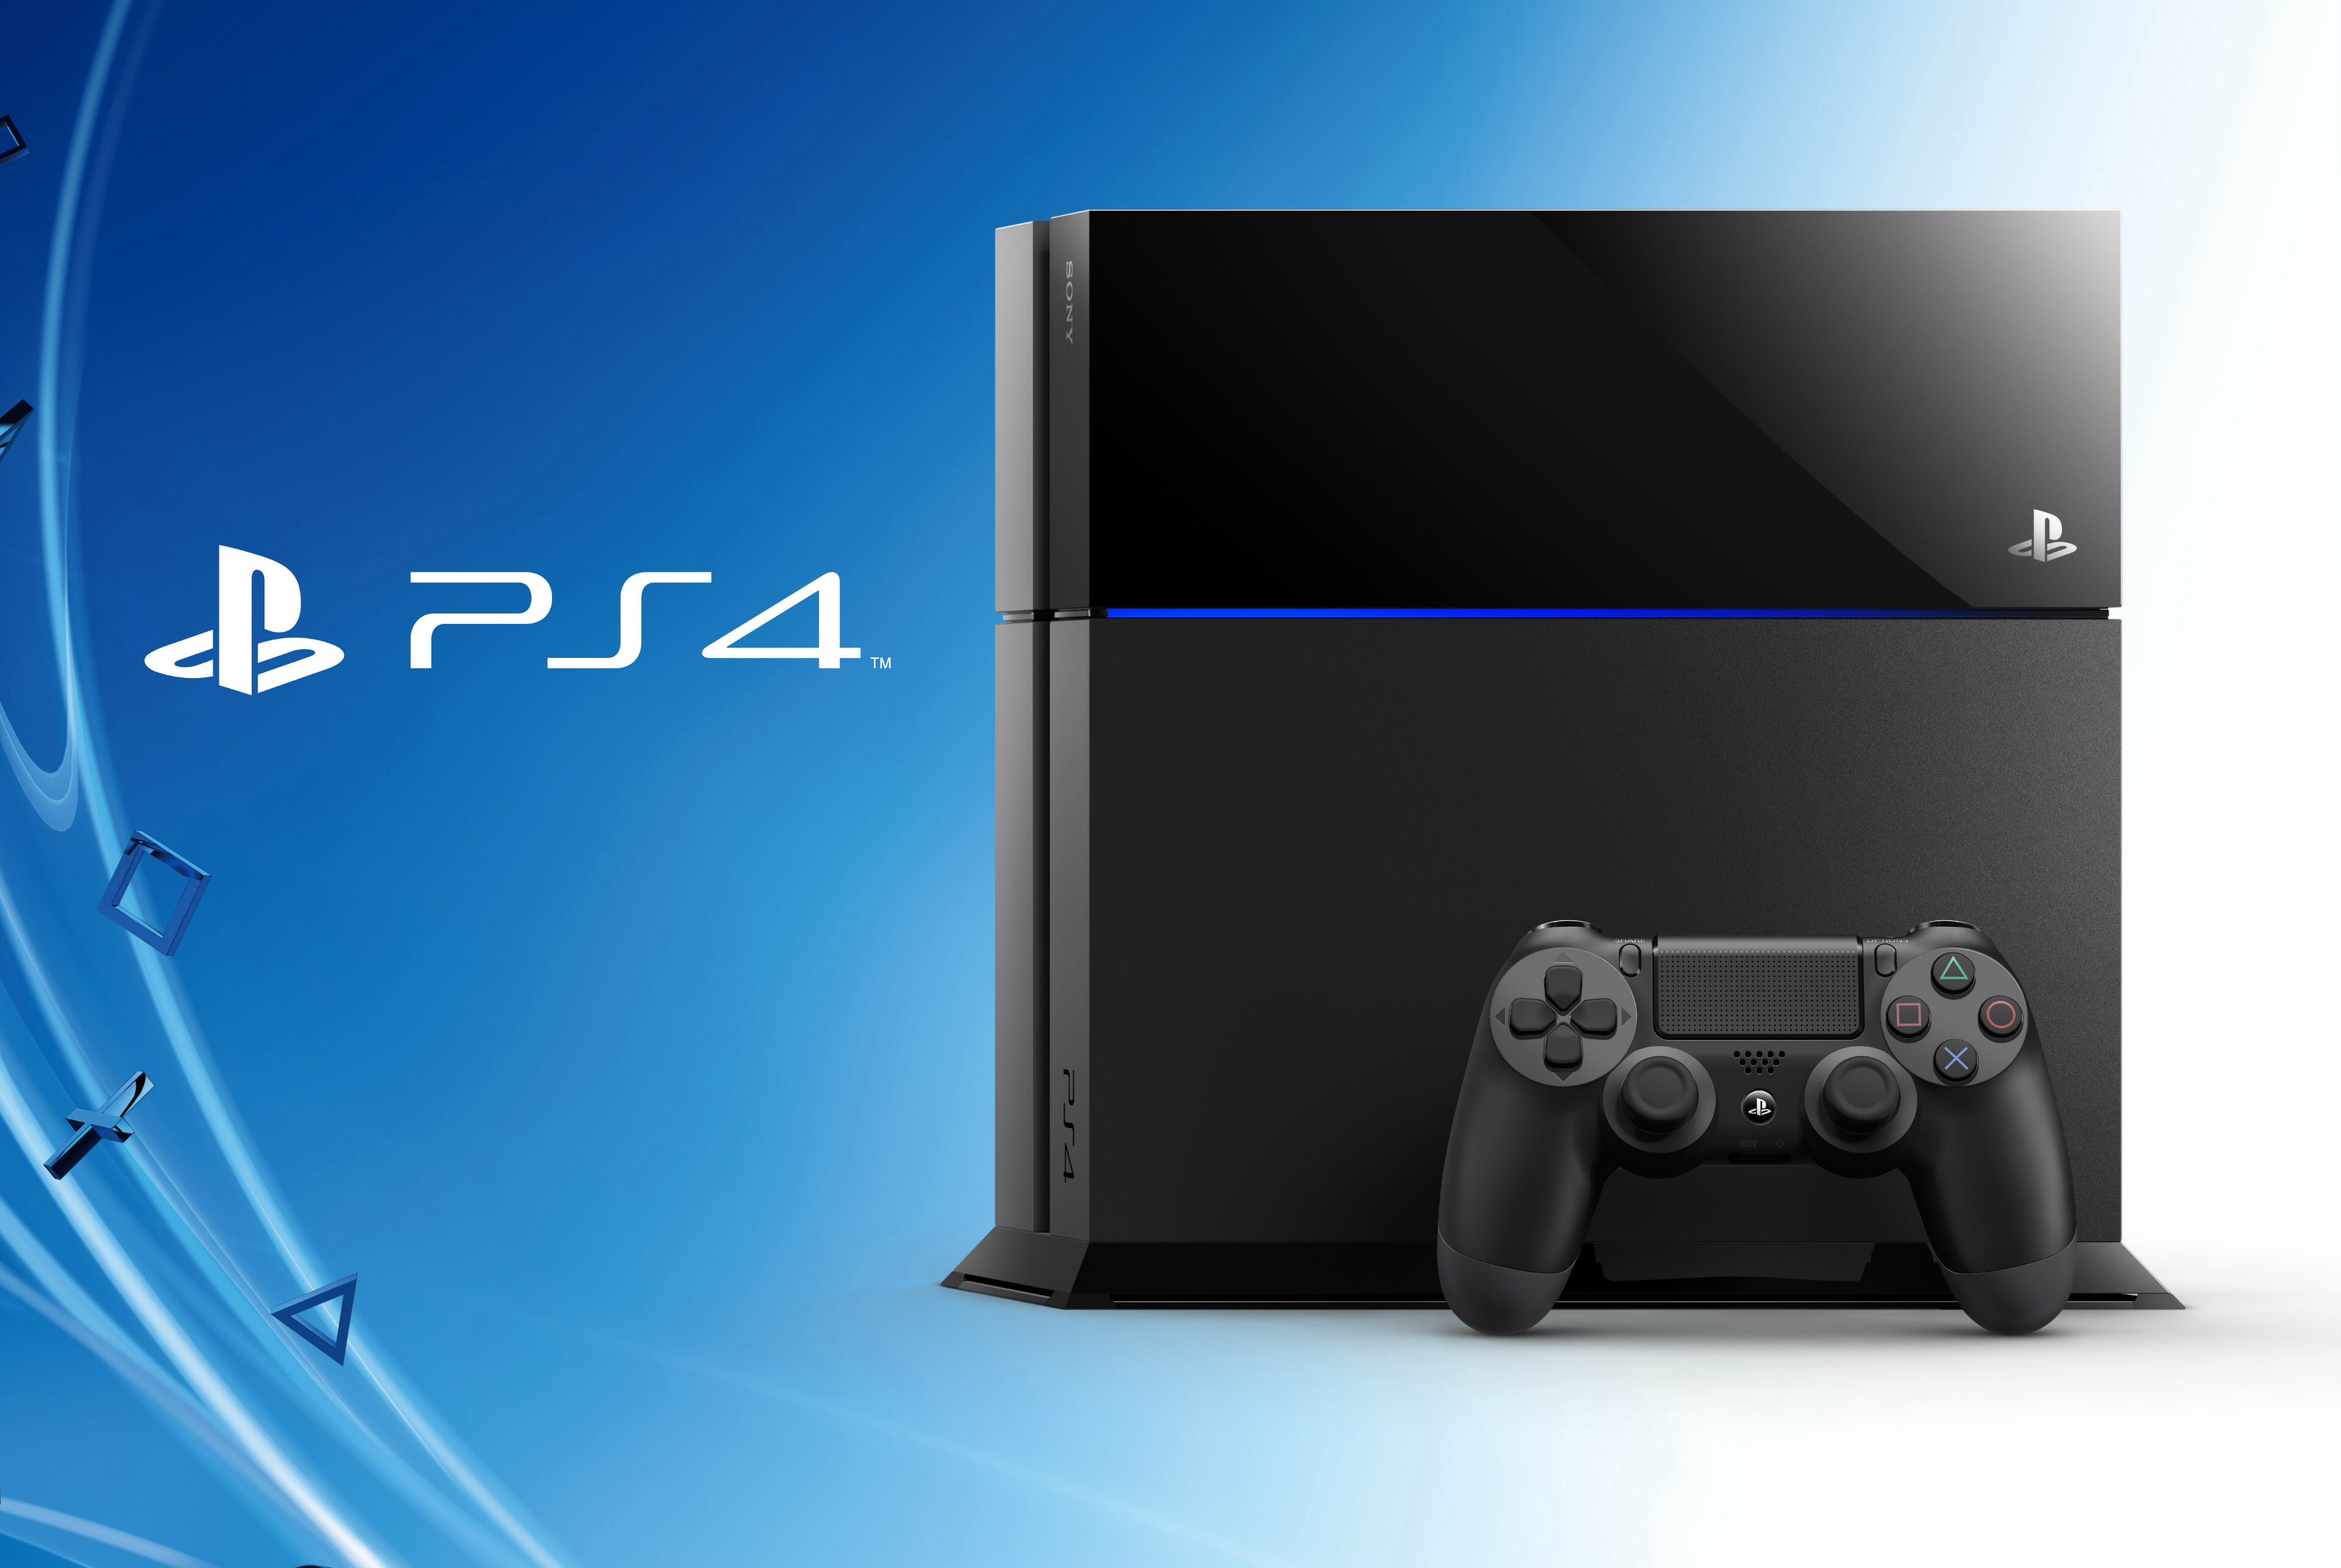 Ps4 ремонтundefined. Сони плейстейшен ps4. PLAYSTATION 4 fat 500gb. Sony 2013 PLAYSTATION 4. Сони плейстейшен 10.